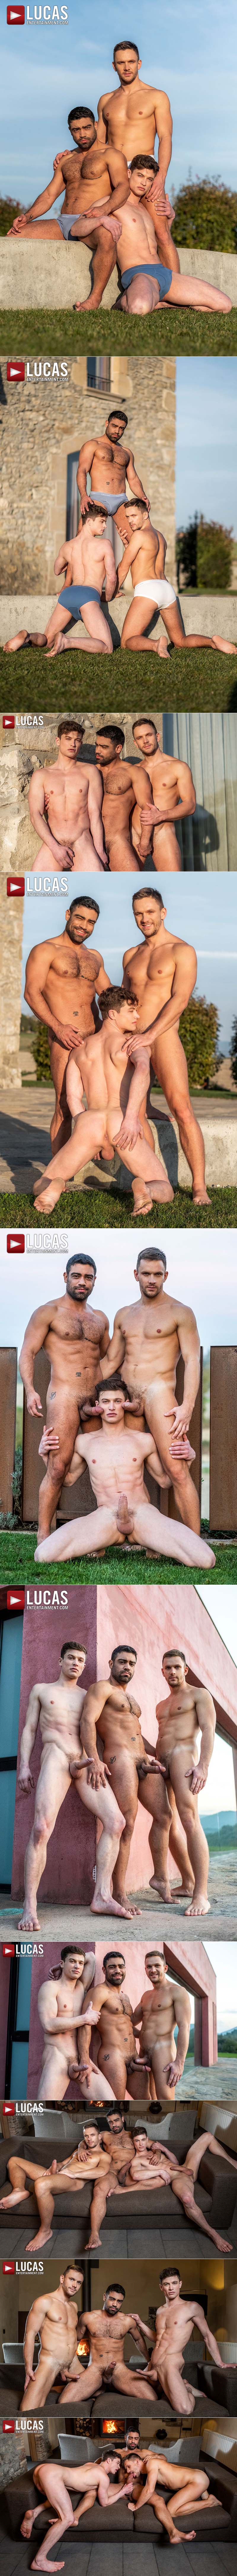 Double The Raw Dick, Scene One (Andrey Vic And Wagner Vittoria Double-Team Ruslan Angelo) at Lucas Entertainment